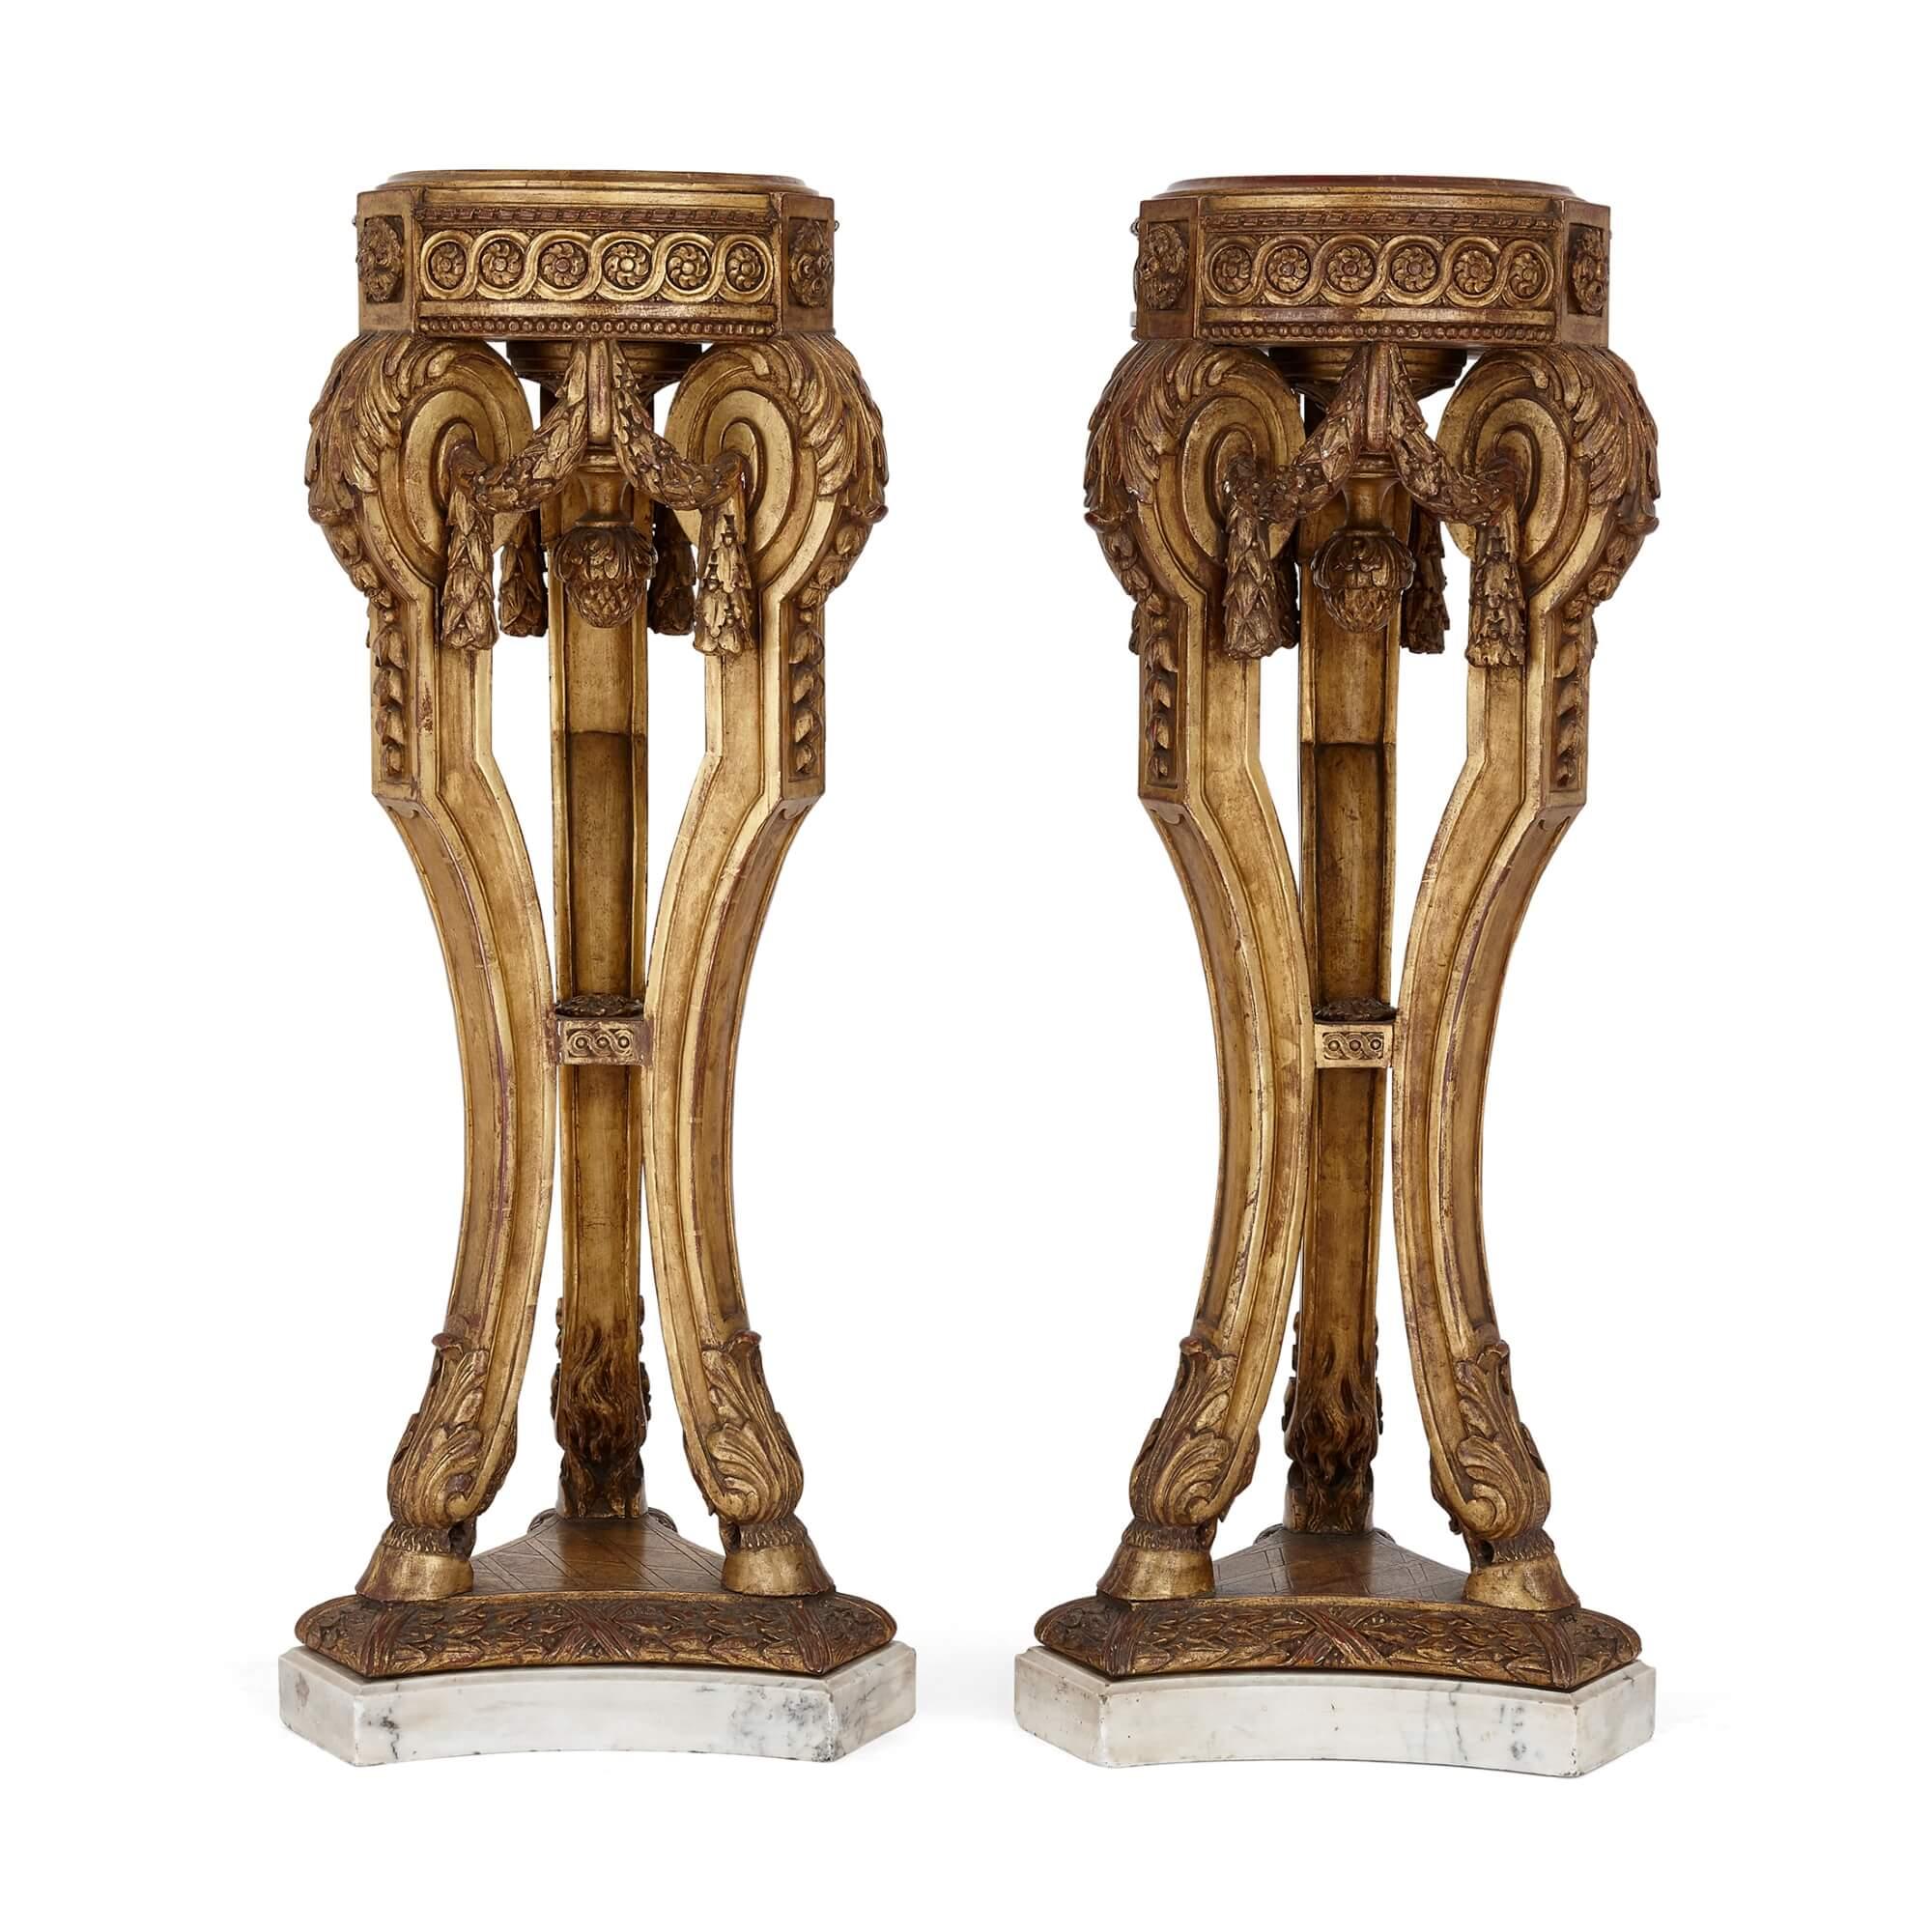 Pair of Louis XVI style giltwood and marble pedestals
French, late 19th Century
Height 98cm, diameter 35cm

The superb tripod pedestals in this pair are fine examples of the Louis XVI style. The giltwood pedestals feature circular plateaux above